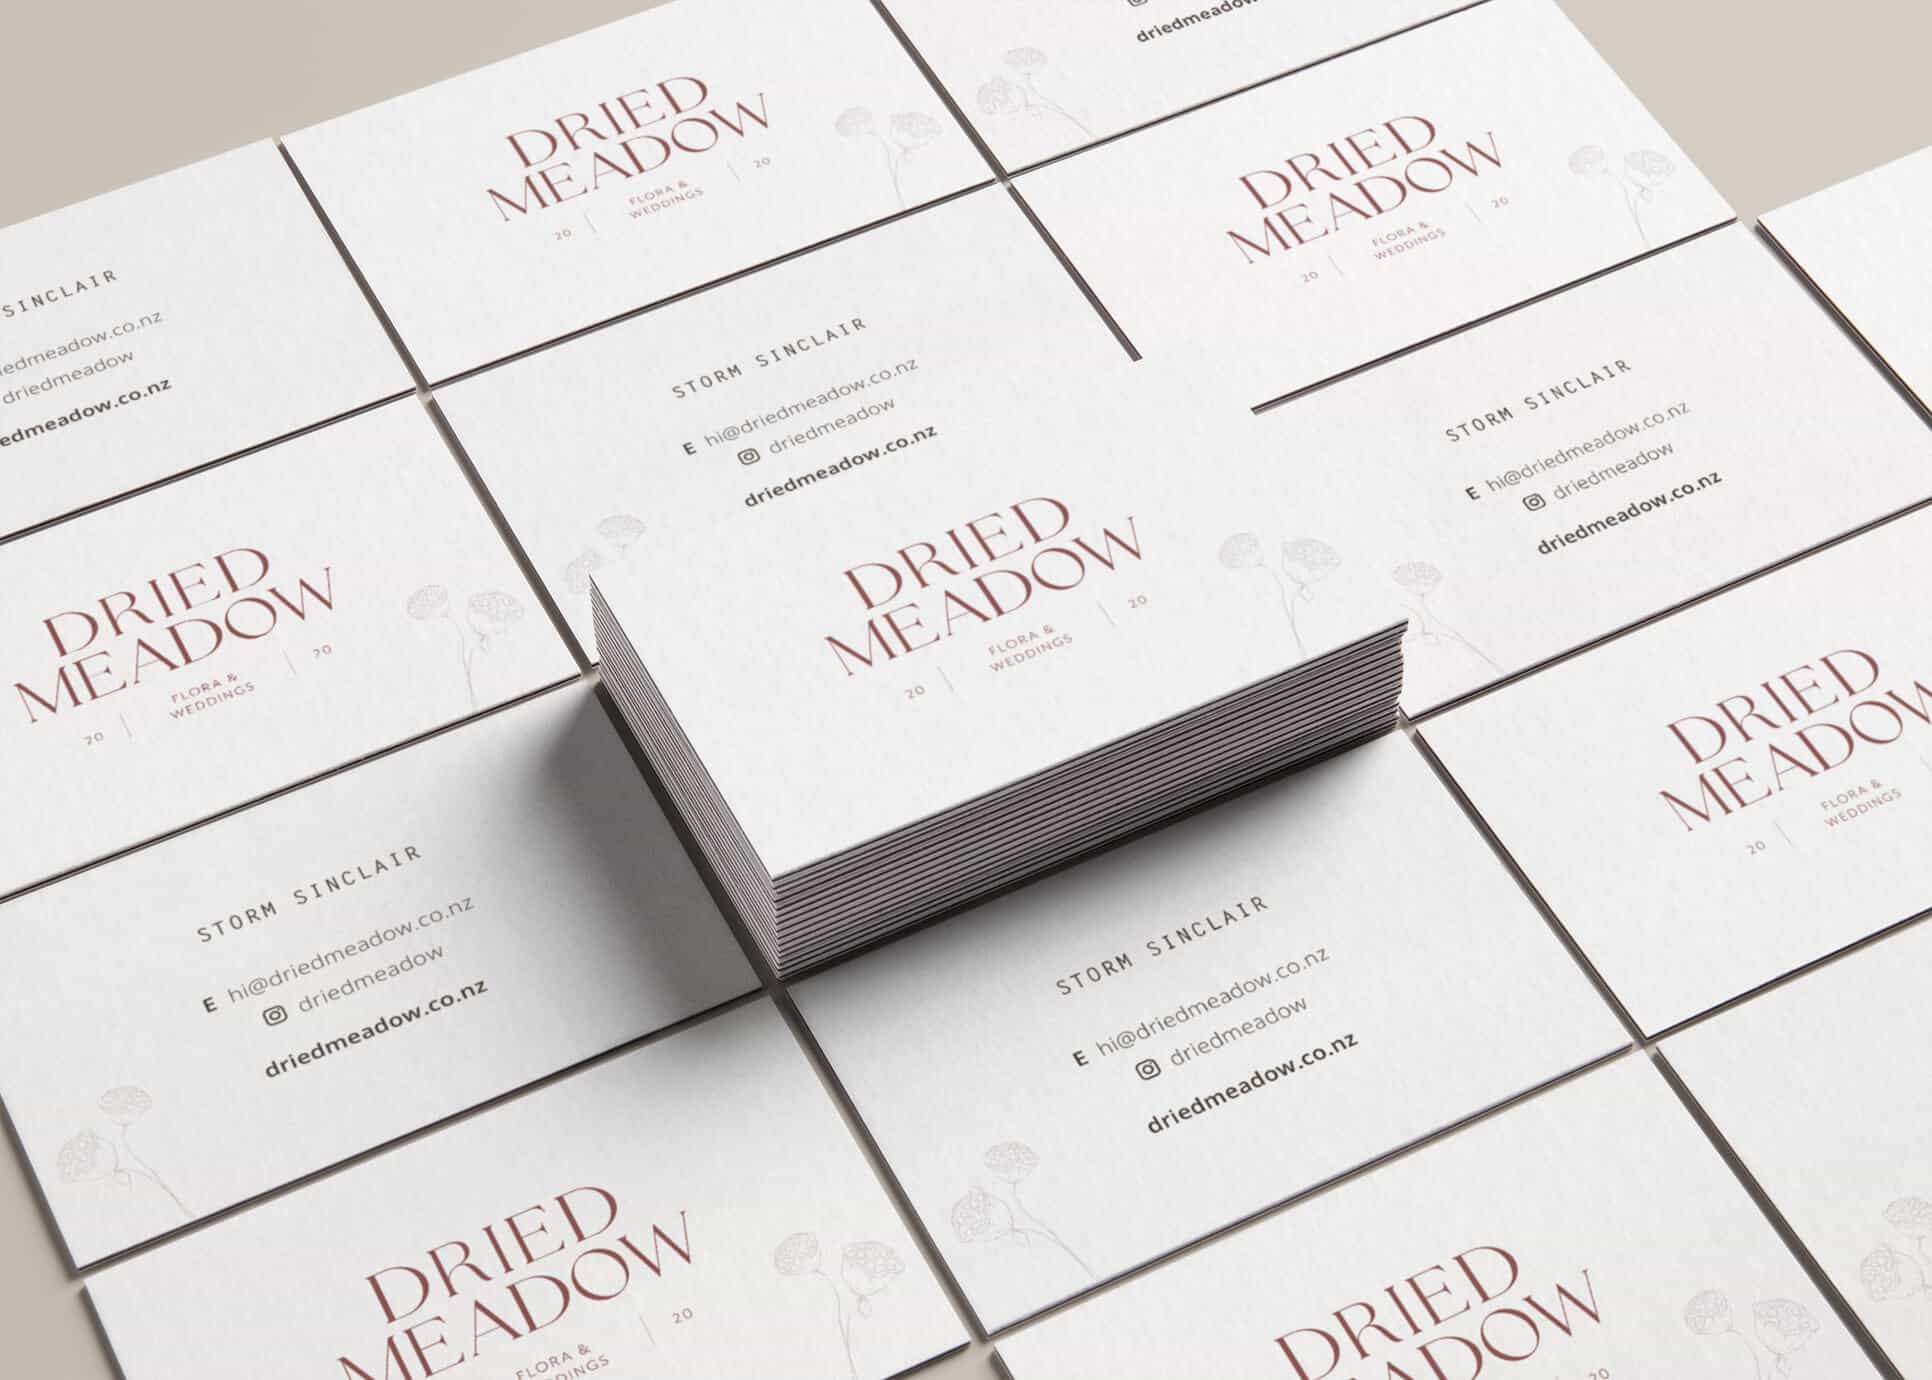 dried meadow perspective business cards mockup 2